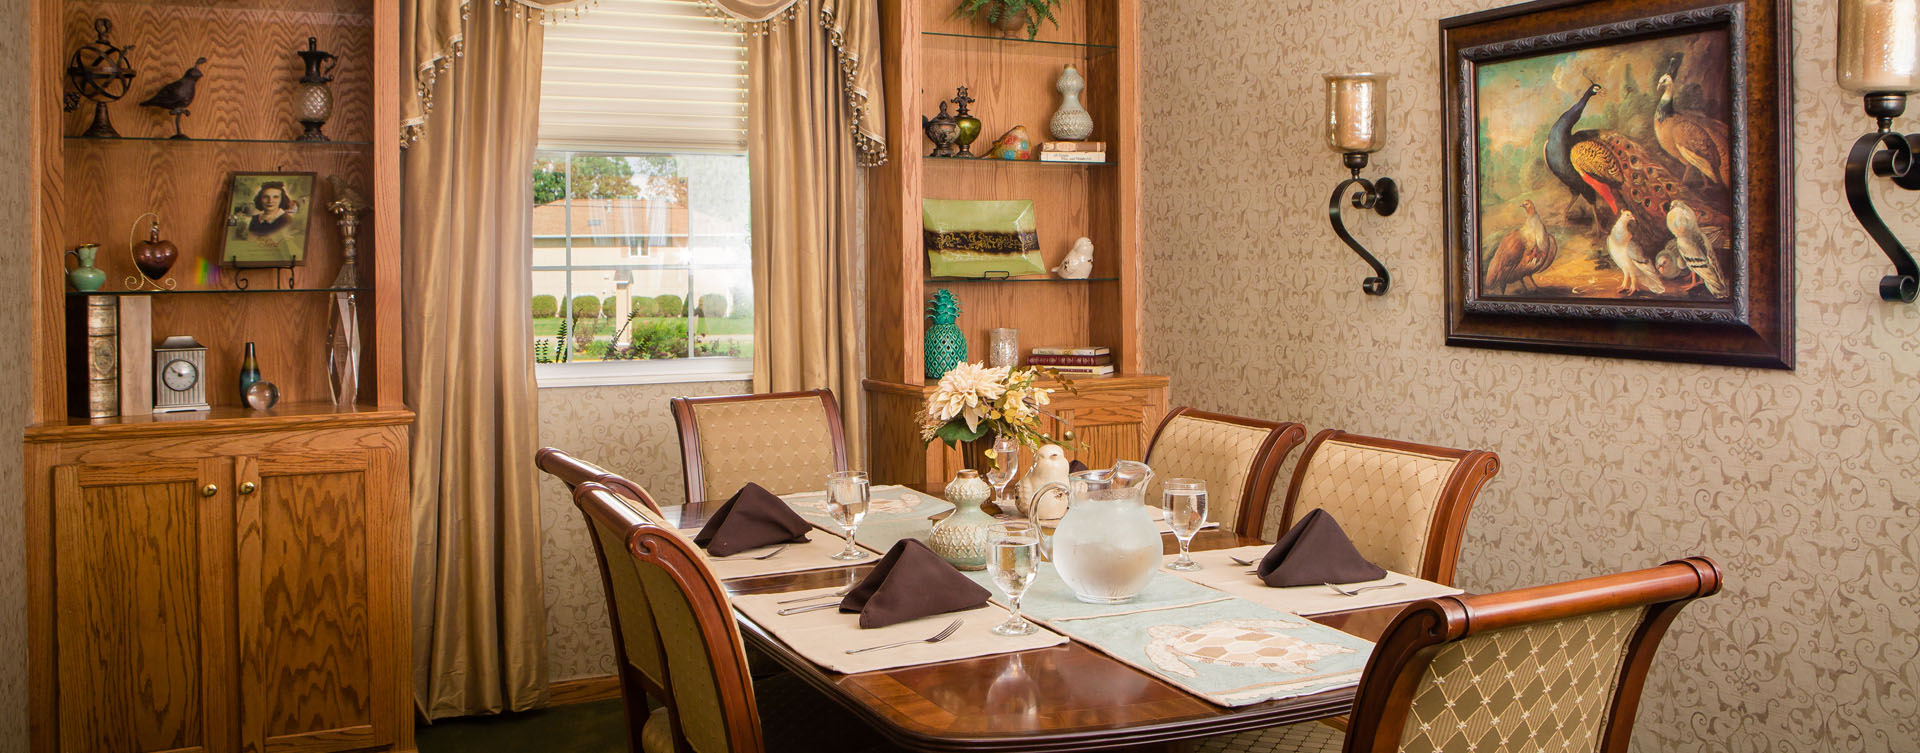 Have fun with themed and holiday meals in the private dining room at Bickford of Macomb